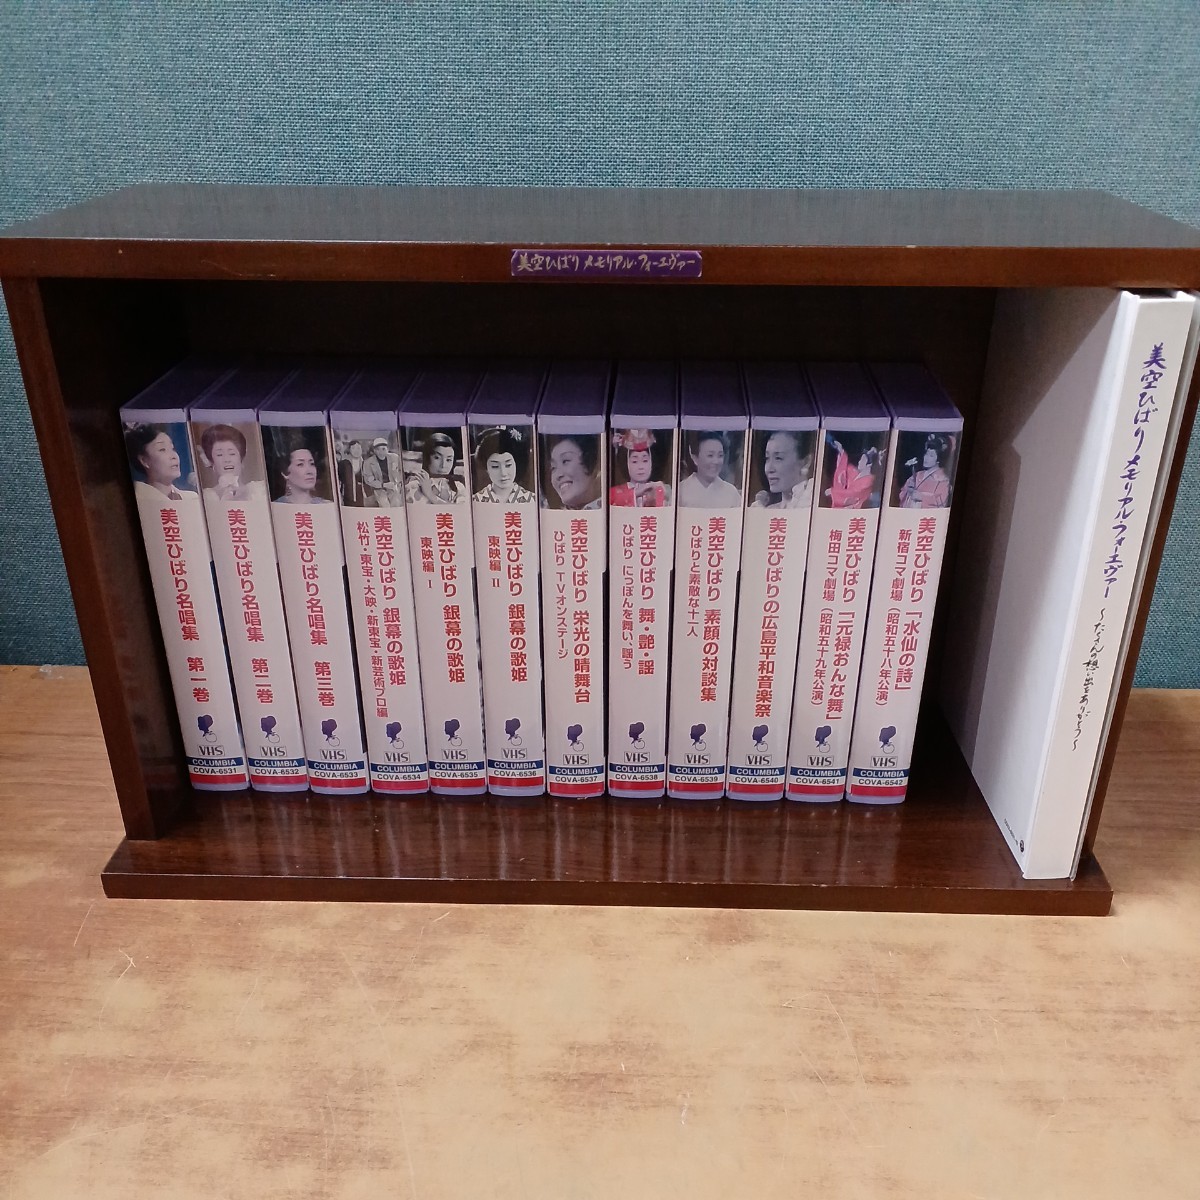  beautiful empty ... memorial four eva-VHS video 12 point booklet 1 pcs. 1 pcs. lack of enka song special case shelves attaching that time thing used long-term storage 